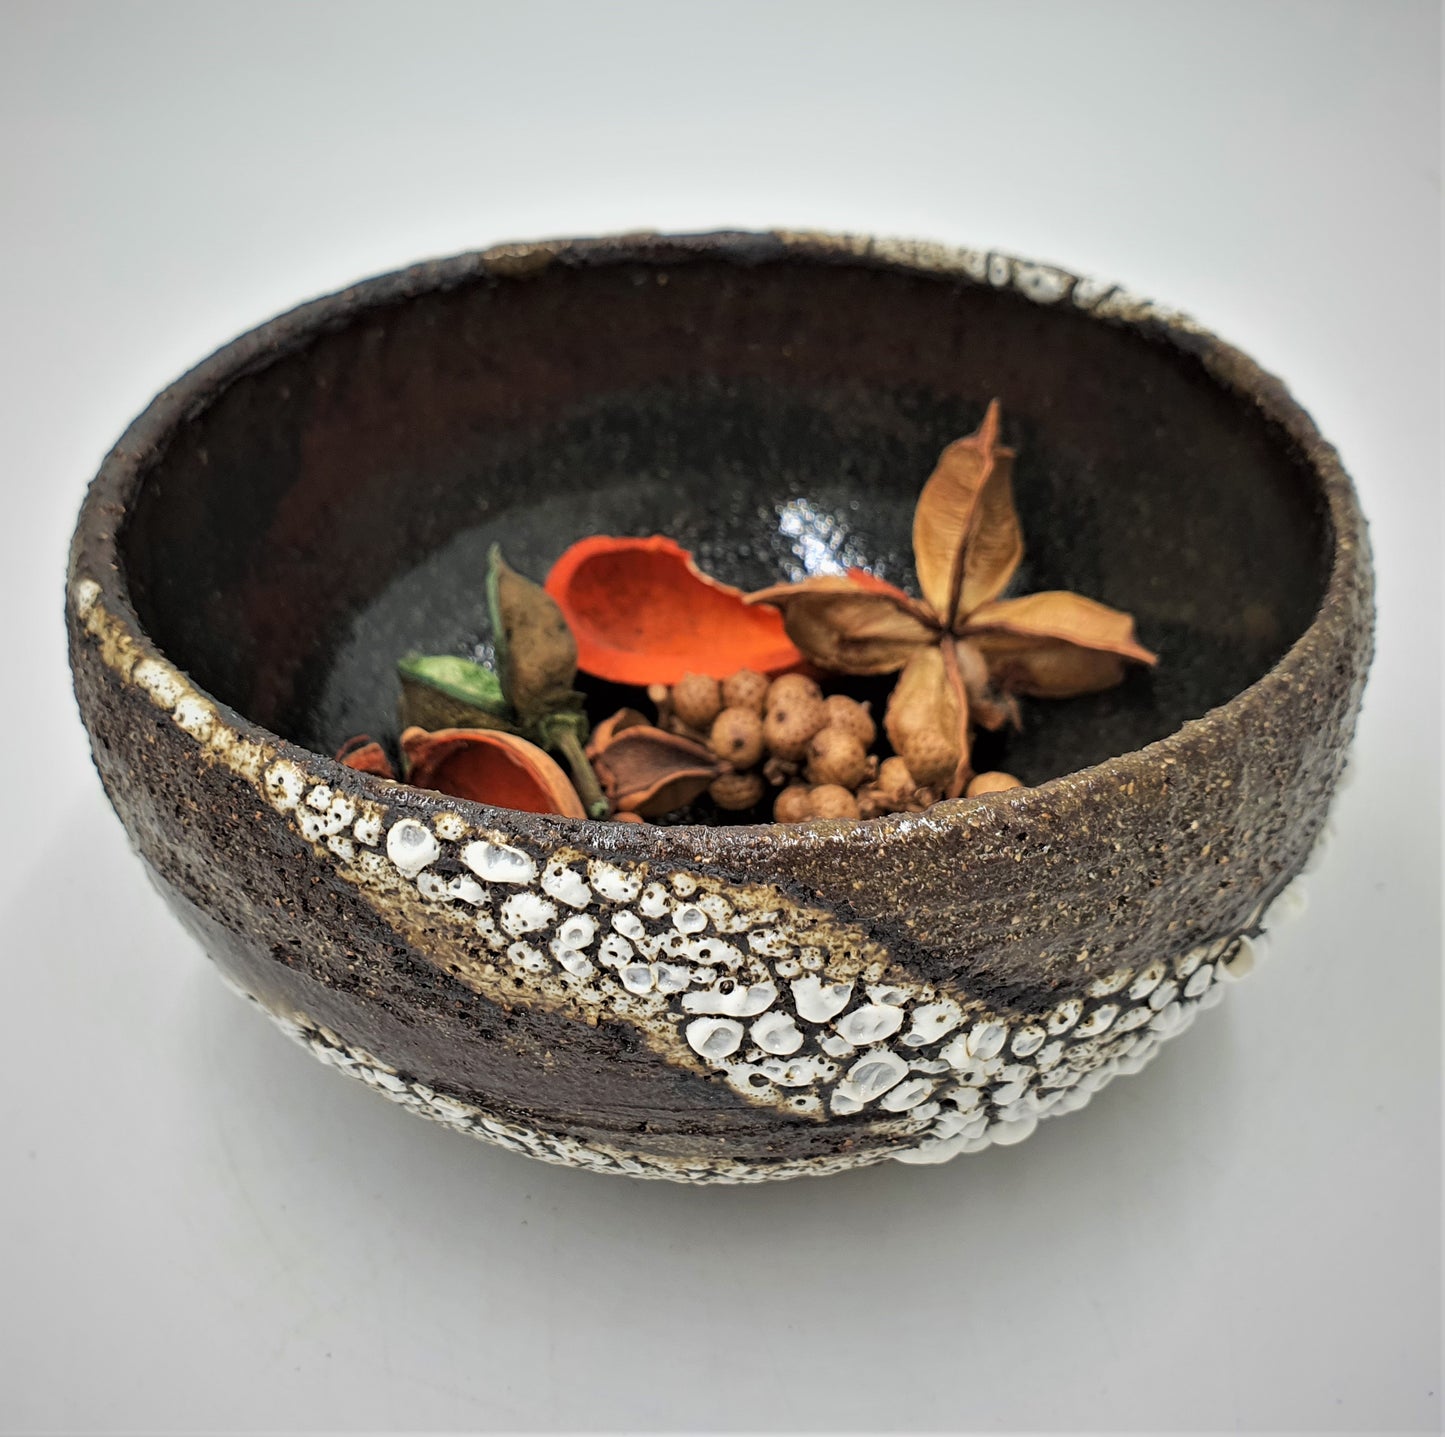 Snowforest Candle / Potpourri Bowls (in Pairs)